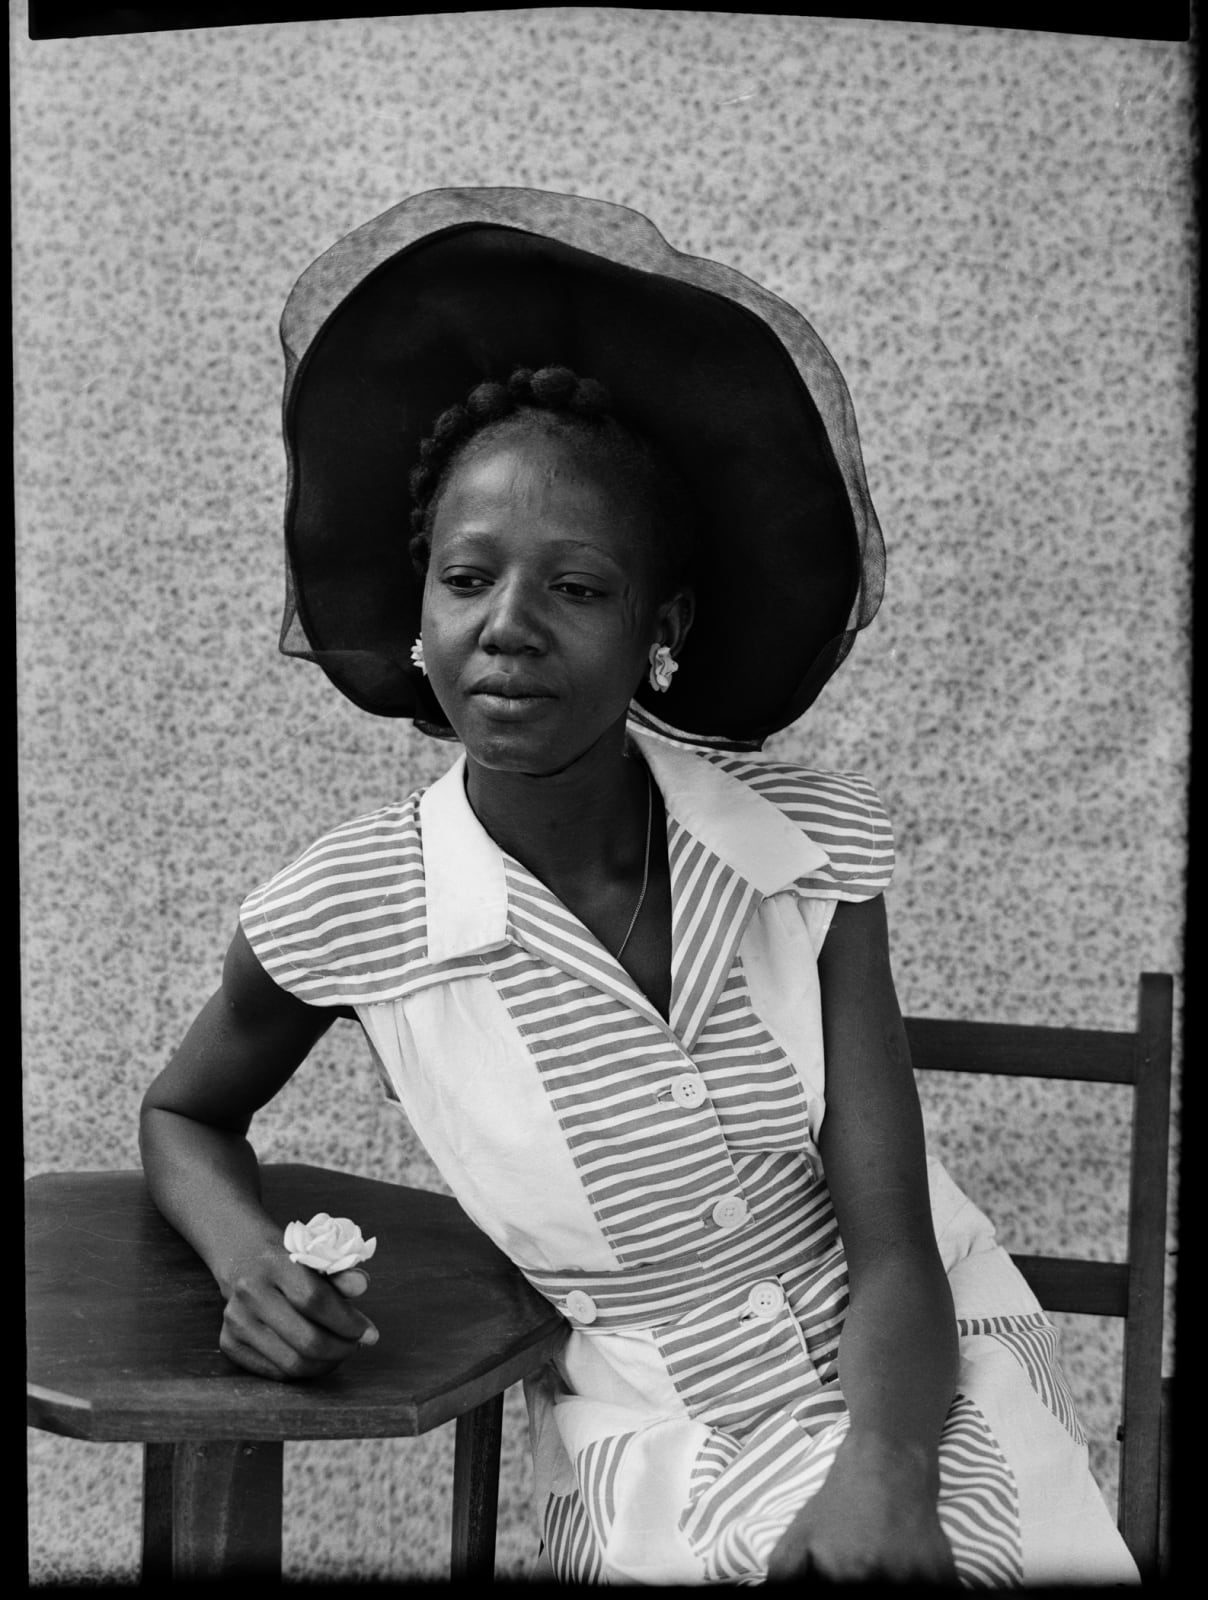 Seydou Keïta Sans titre/ Untitled (00015-MA.KE.025), 1959 Posthumous Gelatin black and white silver print on cartoline paper 280g 60 x 50 cm (23 5/8 x 19 5/8 in.) Edition of 10 + 2 AP Posthumous Gelatin black and white silver print on cartoline paper 280g back-mounted on Aluminium 1mm 162 x 122 cm (63 25/32 x 48 1/32 in) Edition of 5 + 2 AP